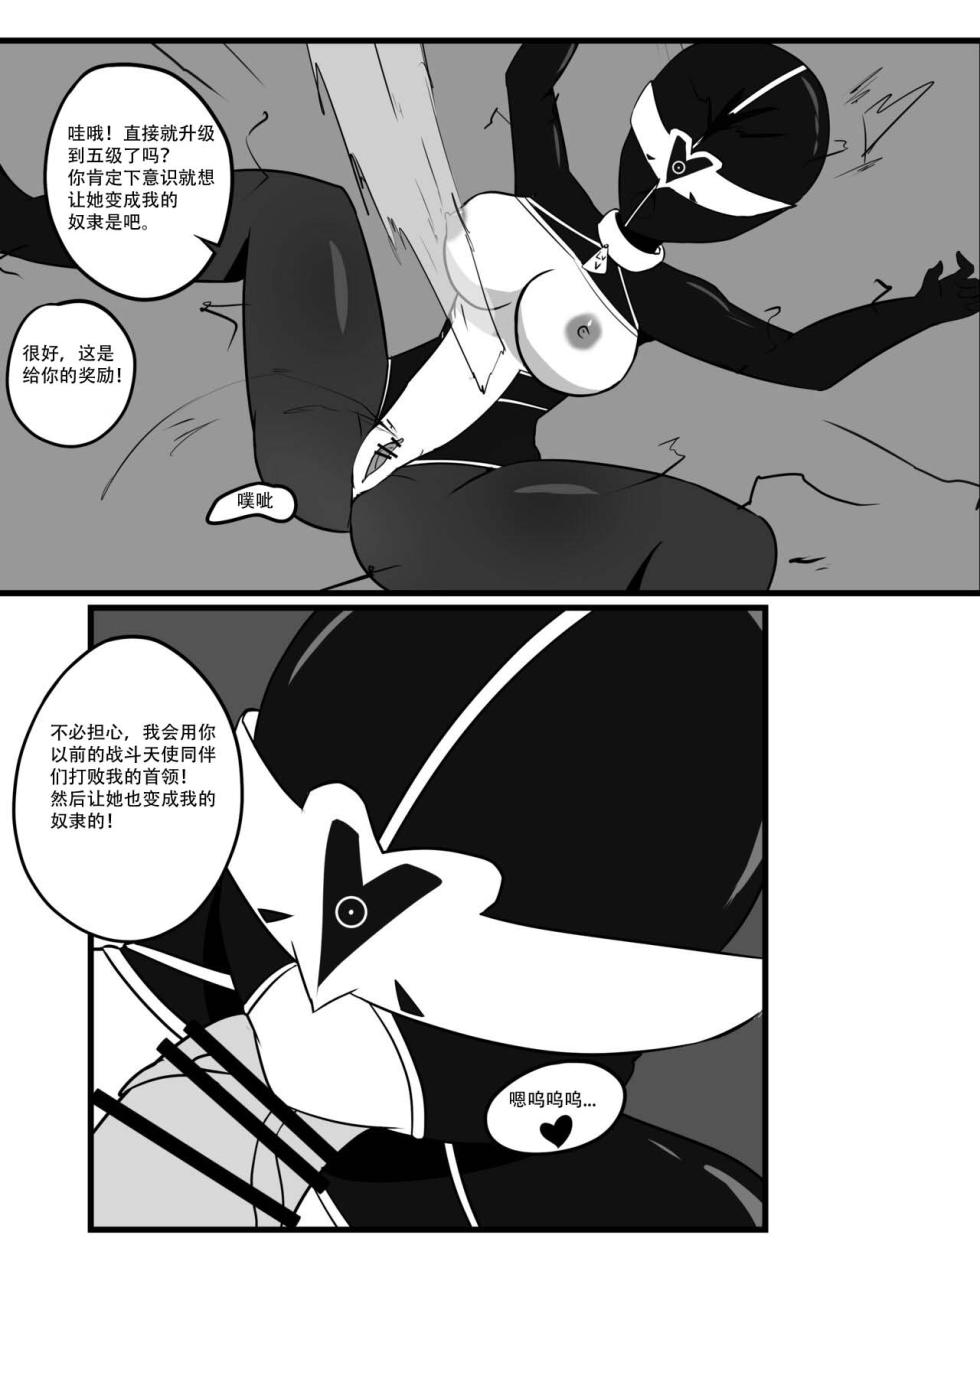 [Aynes] The Degradation of Angels [心海汉化组] - Page 33